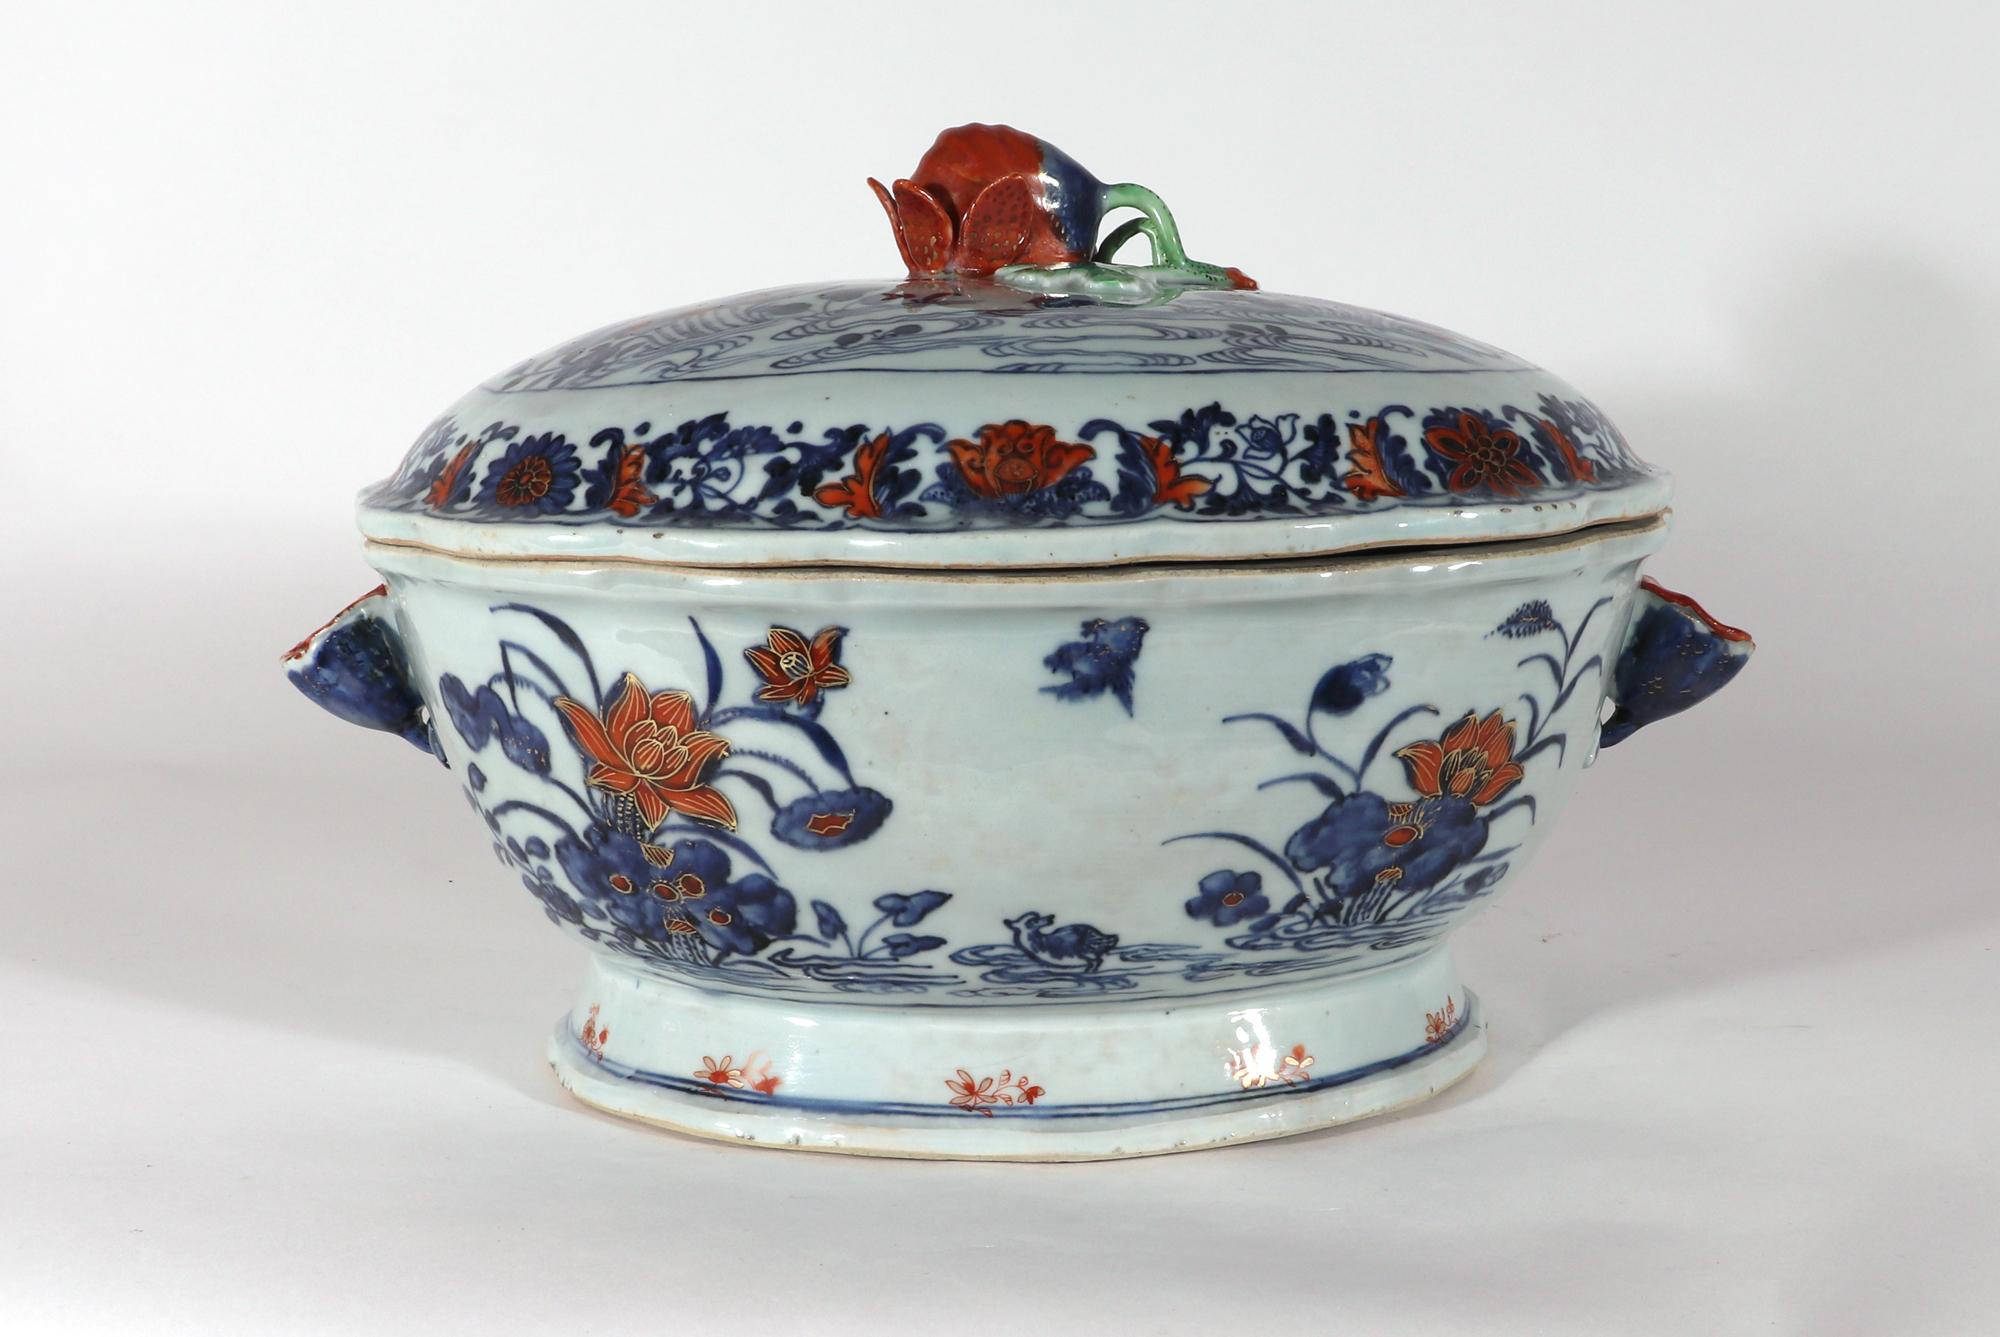 18th Century Chinese Export Porcelain Imari Tureen and Cover-Duck in Pond For Sale 1